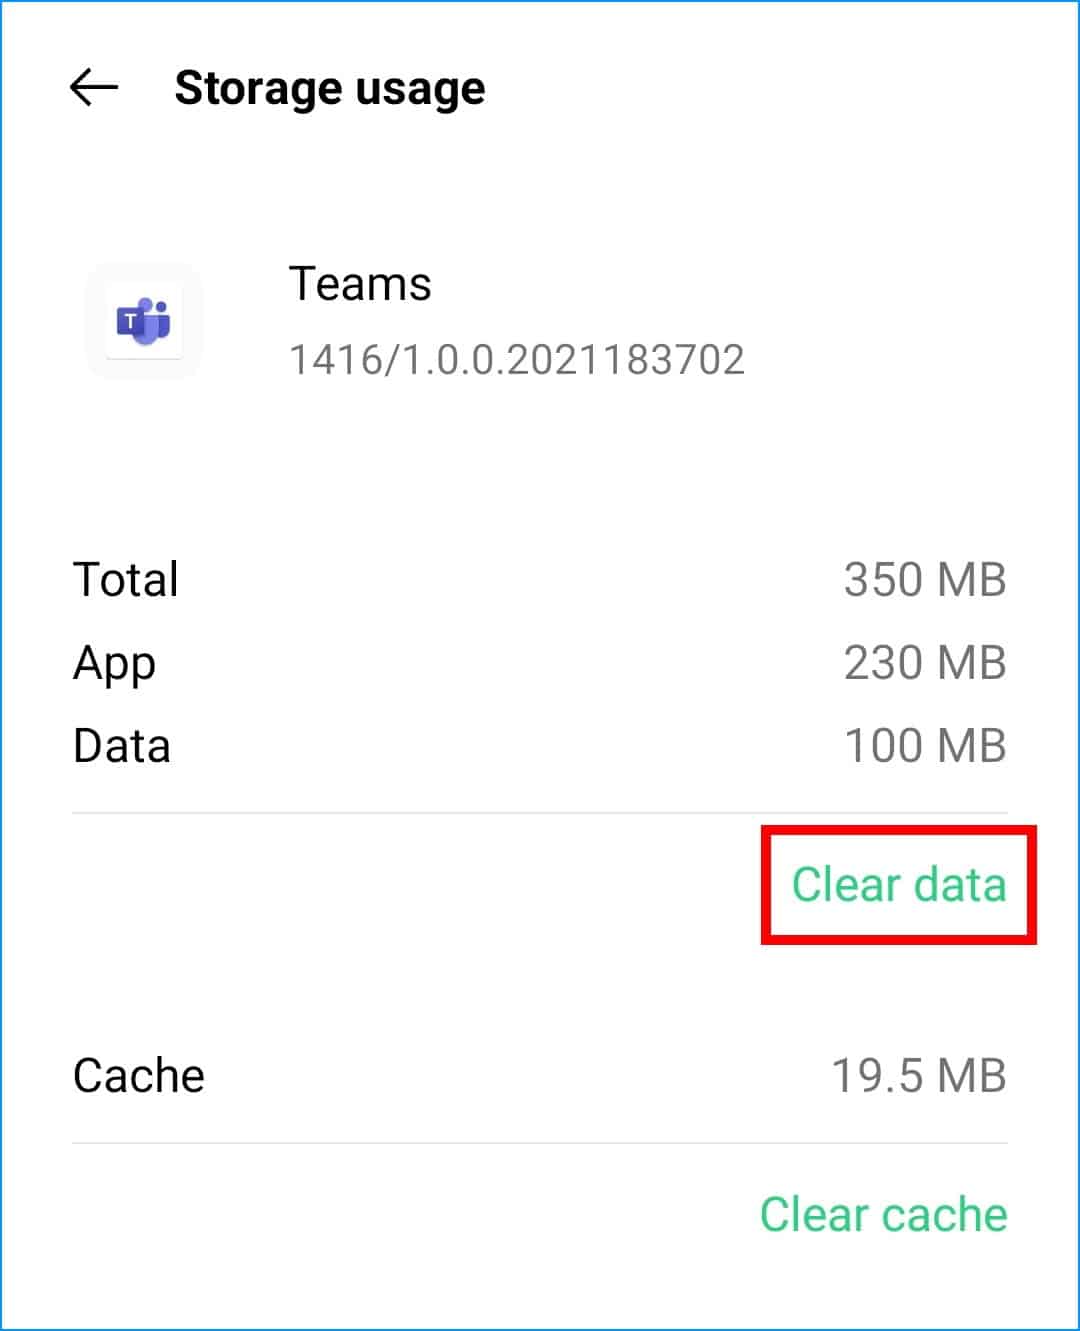 clear Microsoft Teams app cache and data on Android to fix mobile notifications not working or showing